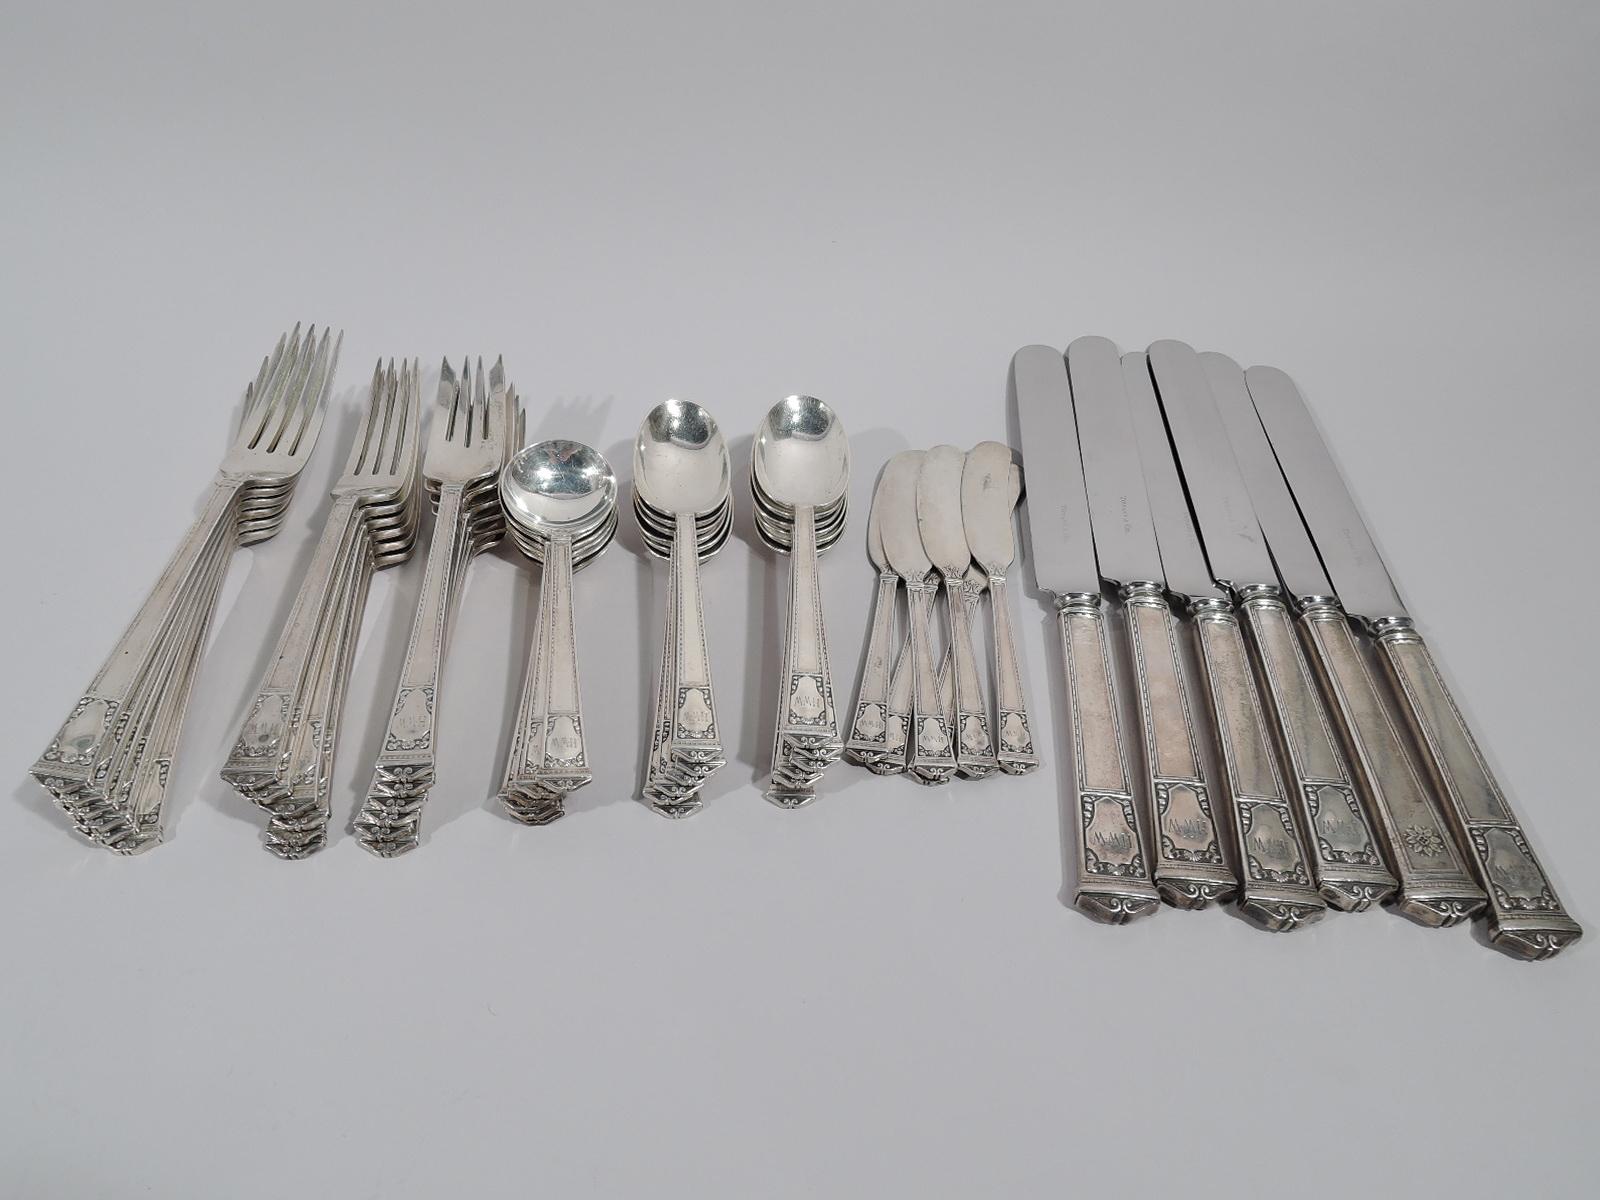 San Lorenzo sterling silver dinner set for six. Made by Tiffany & Co. in New York, circa 1925. This set comprises 48 pieces (dimensions in inches): Forks 6 dinner forks (7 5/8), 6 regular forks (7) and 6 salad forks (6 7/8), spoons 12 teaspoons (6)